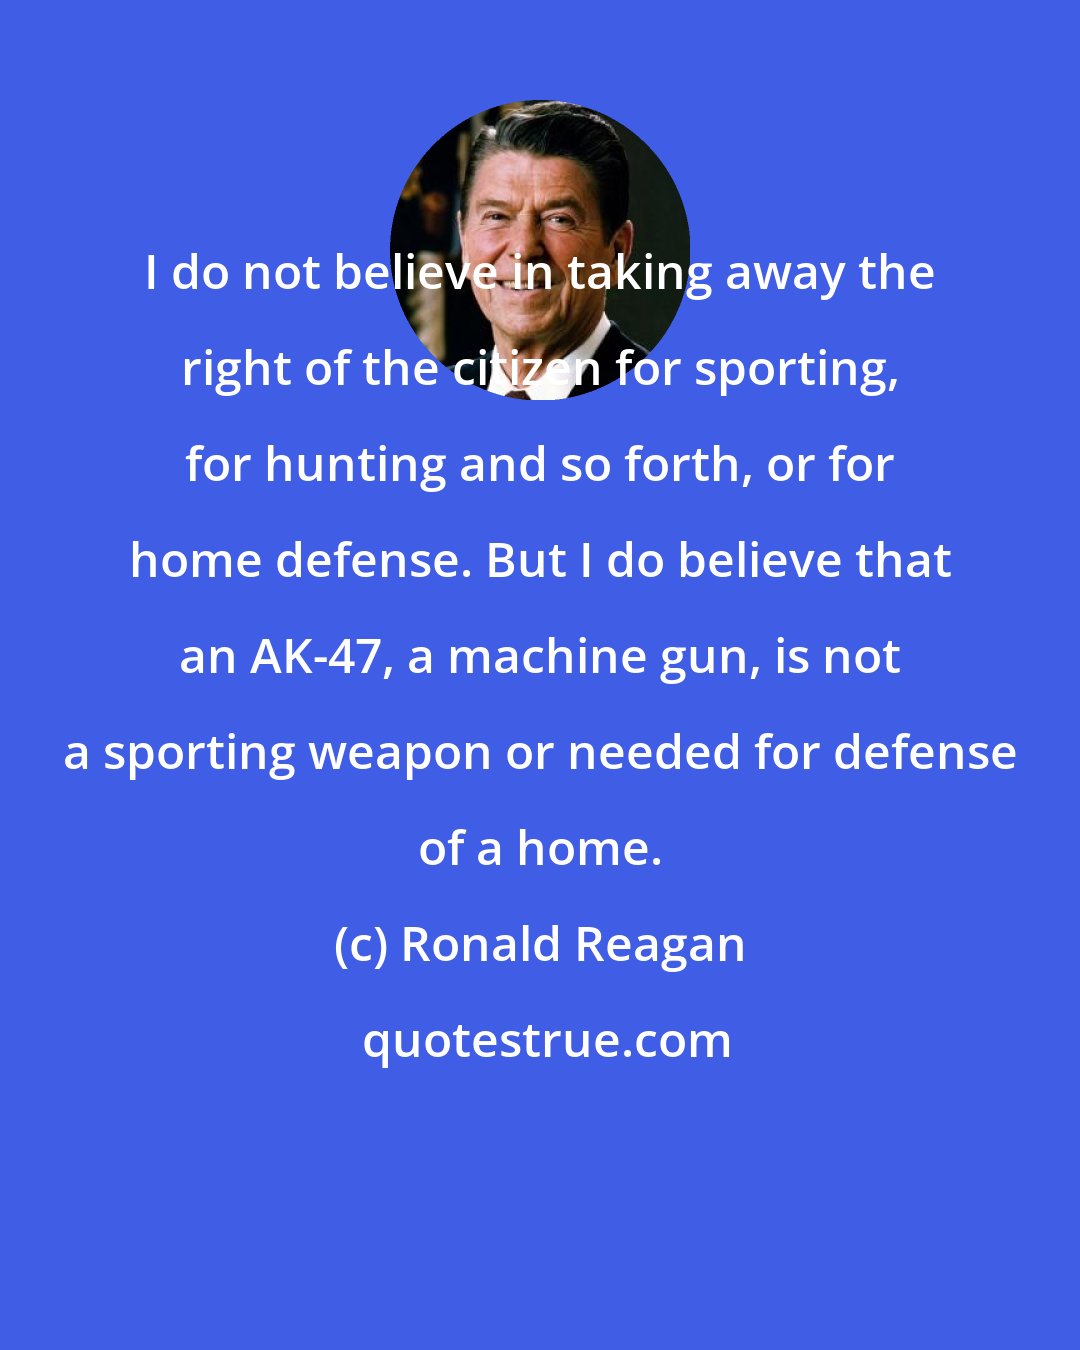 Ronald Reagan: I do not believe in taking away the right of the citizen for sporting, for hunting and so forth, or for home defense. But I do believe that an AK-47, a machine gun, is not a sporting weapon or needed for defense of a home.